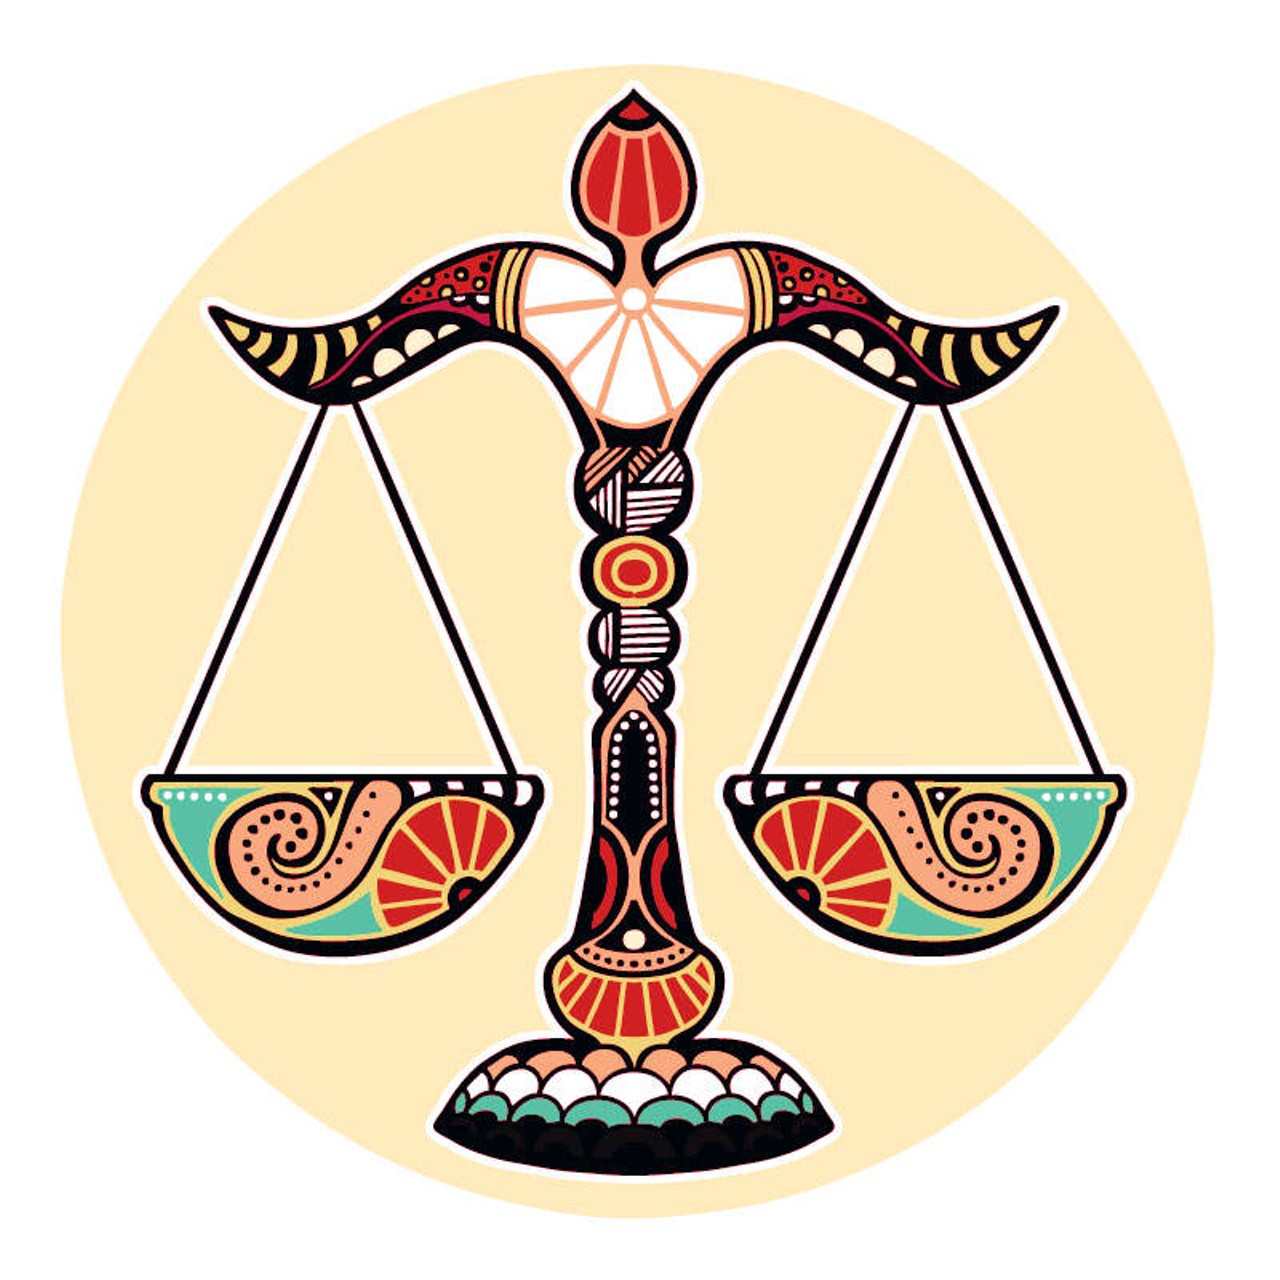 LIBRA (Sept. 21-Oct. 20): 
You don&#146;t know how this is going to work but you&#146;re clear that you have to take the chance. A little gun shy from a few rounds of &#147;fiscal&#148; difficulties, and SOL in the confidence department, you have to find a way to go for it one more time. If it&#146;s any comfort to you, there&#146;s a lot more support for your success than you&#146;ve had in a dog&#146;s age. As much as there are no guarantees, the one thing you do have is enough sense to see that you can&#146;t keep running around in circles and you aren&#146;t getting any younger. It&#146;s time to take a flying leap. What have you got to lose?